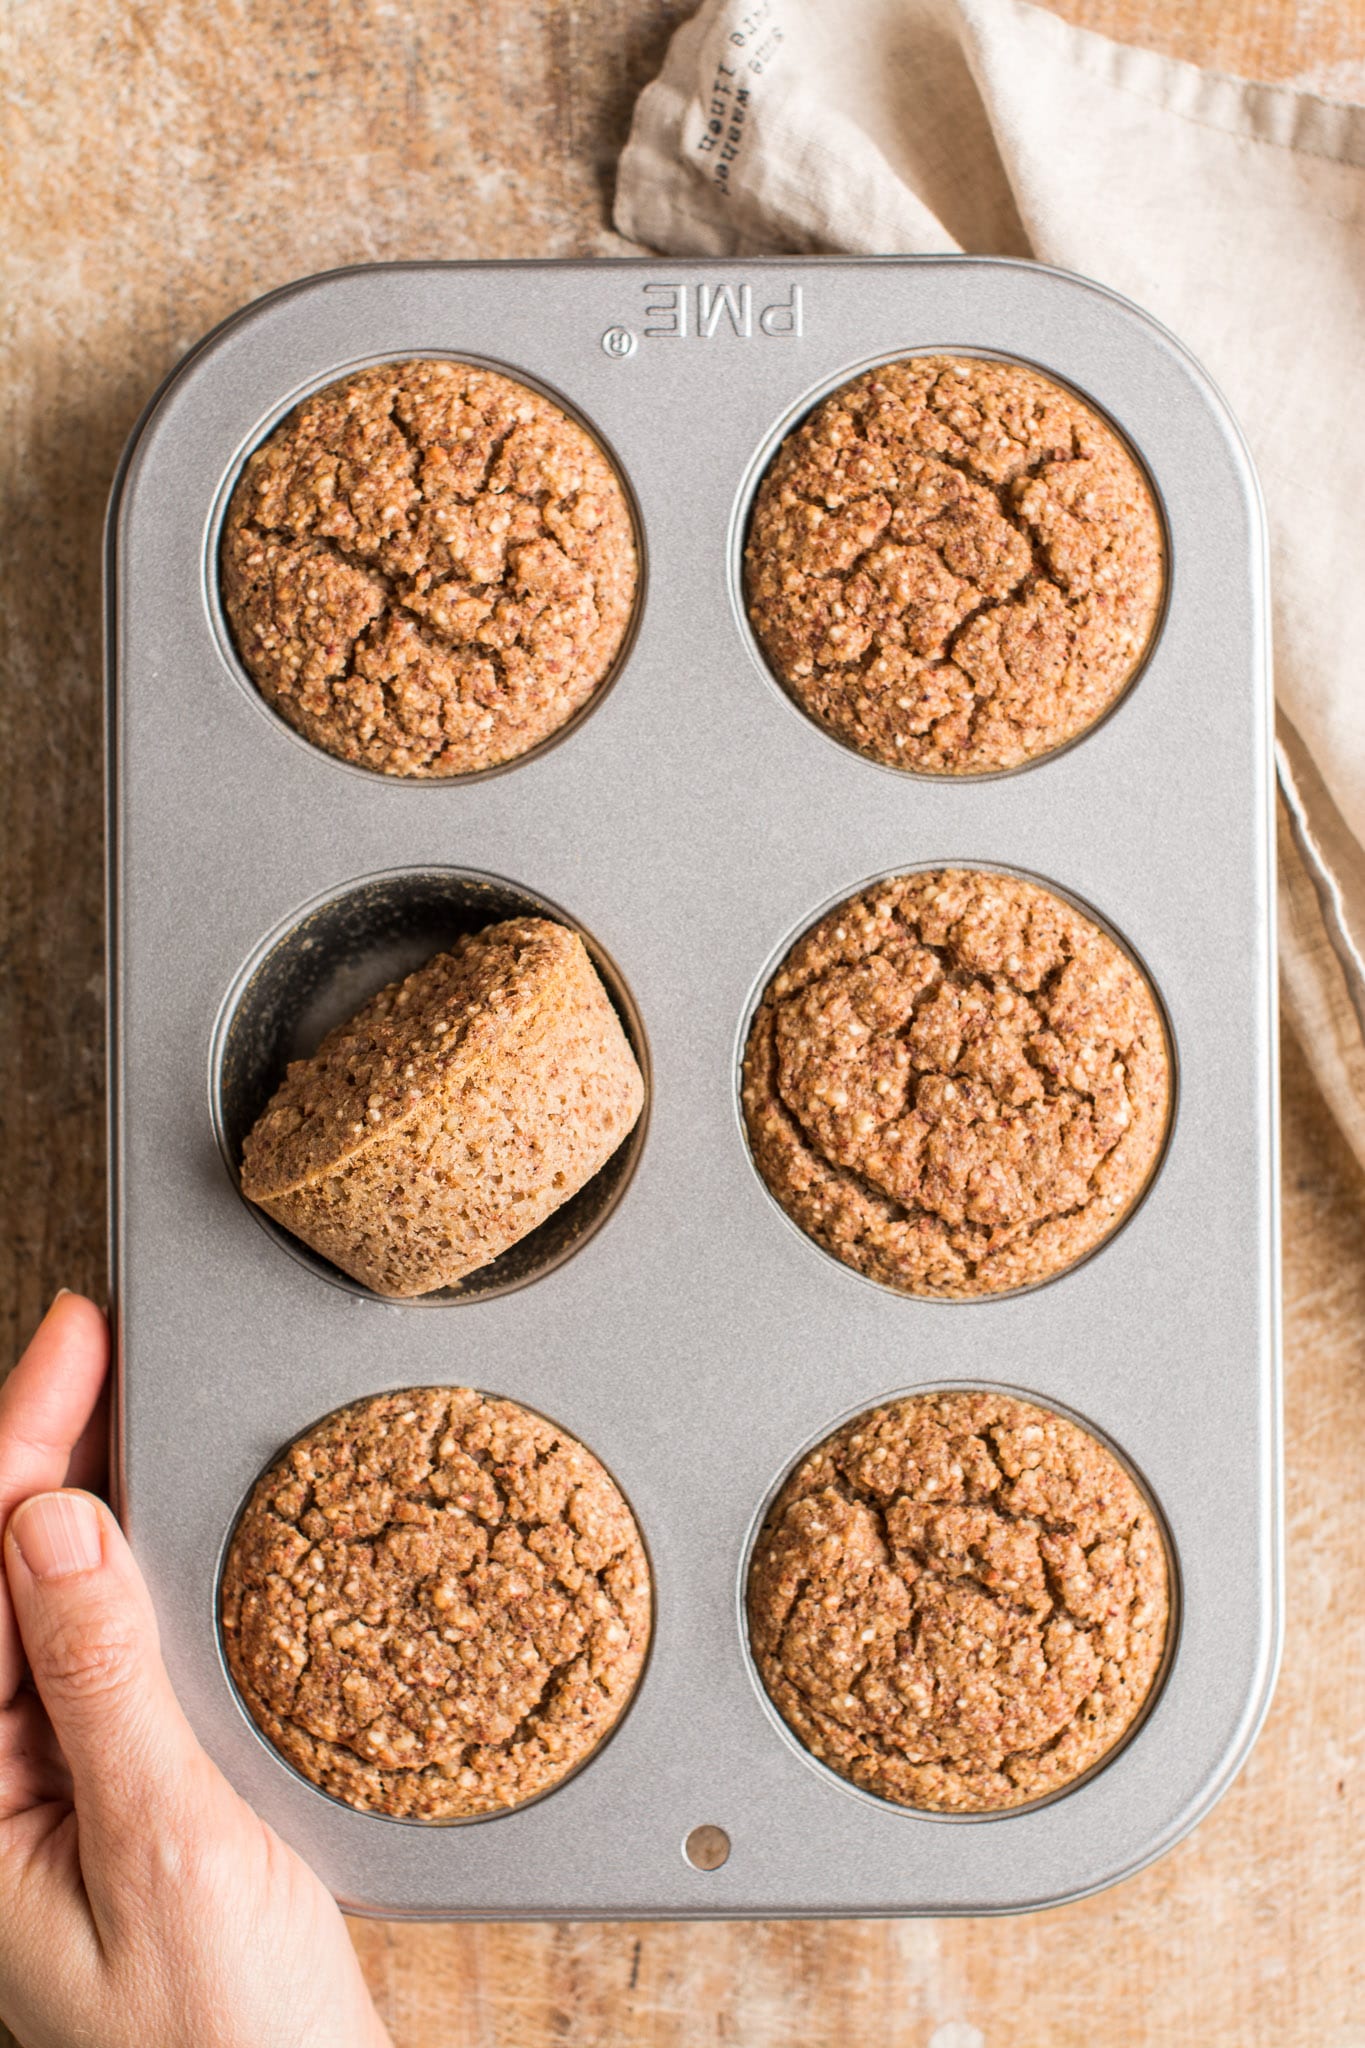 Savoury vegan sorghum muffins that make a perfect healthy breakfast or snack requiring only 5 ingredients. 